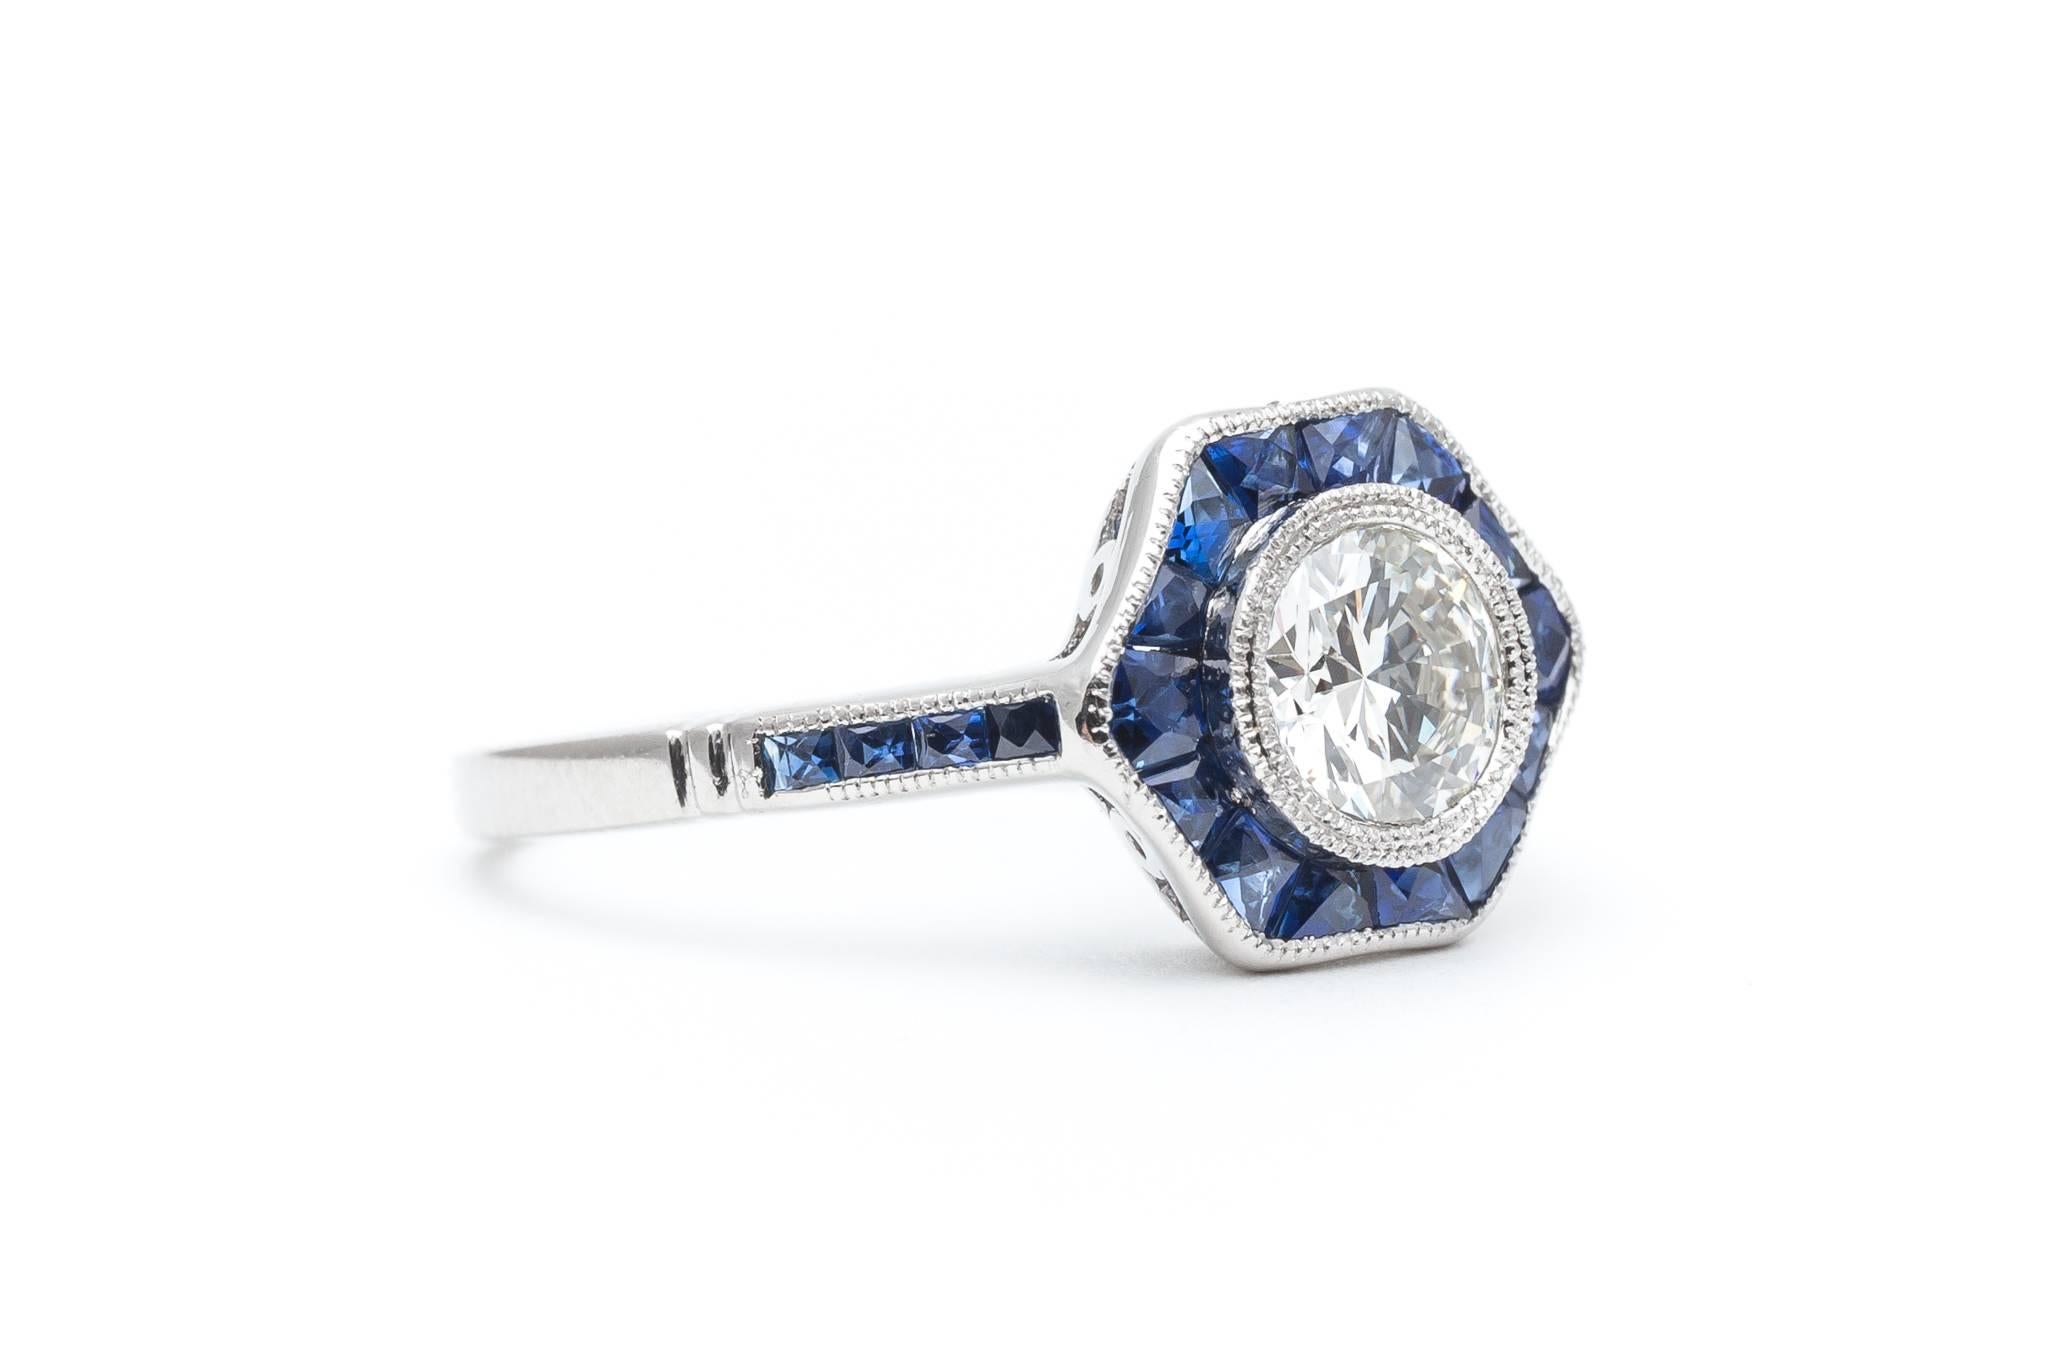 A beautiful hand crafted sapphire and diamond ring in luxurious platinum. Centered by a sparkling antique European cut diamond weighing 0.75 carats, this ring features a uniquely styled halo of bespoke French cut sapphires.

Designed as a flower